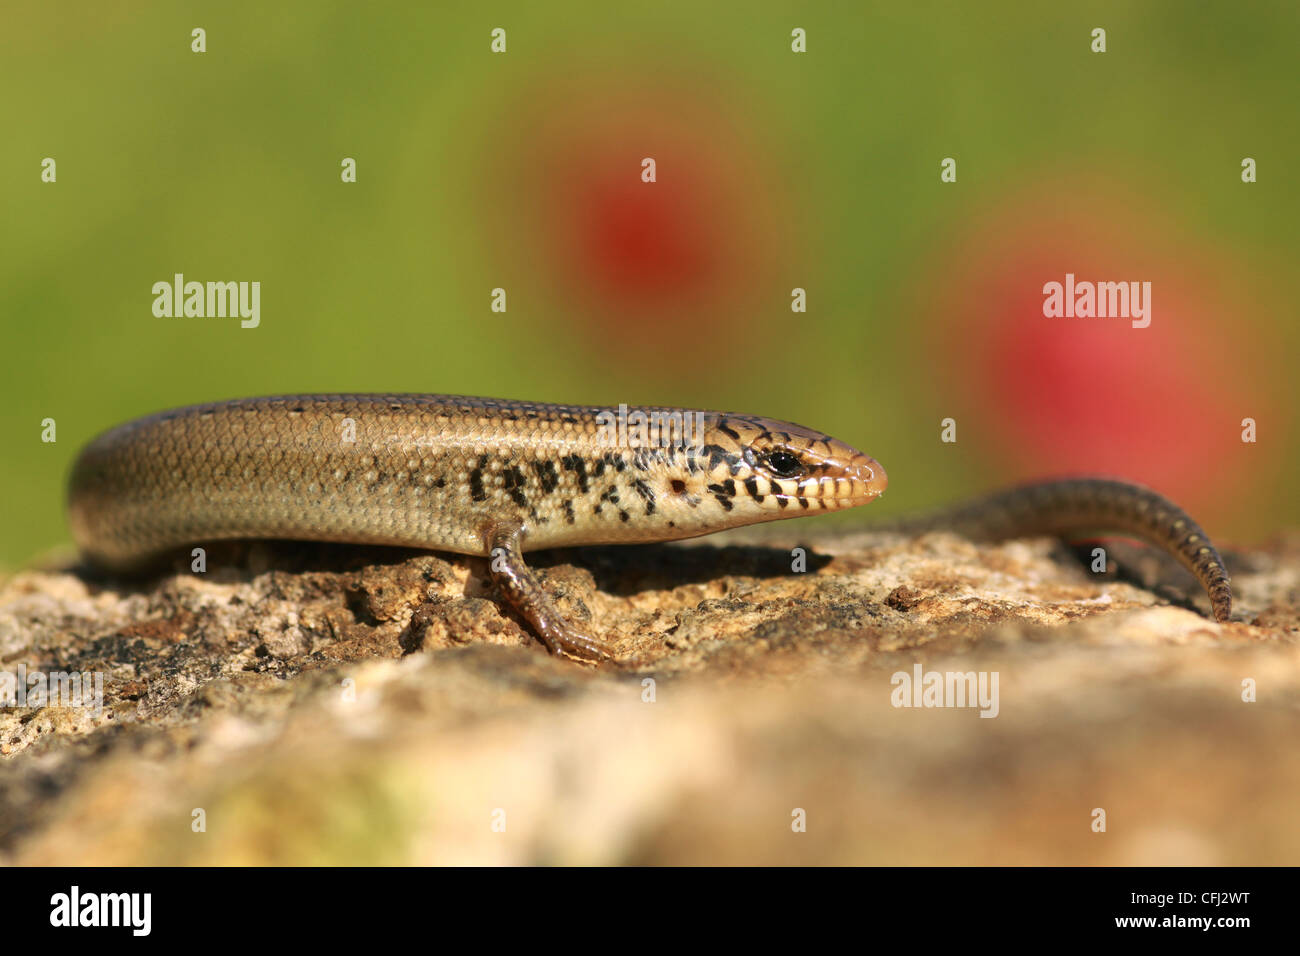 Chalcides ocellatus, or Ocellated Skink (also known as Eyed Skink or gongilo Stock Photo